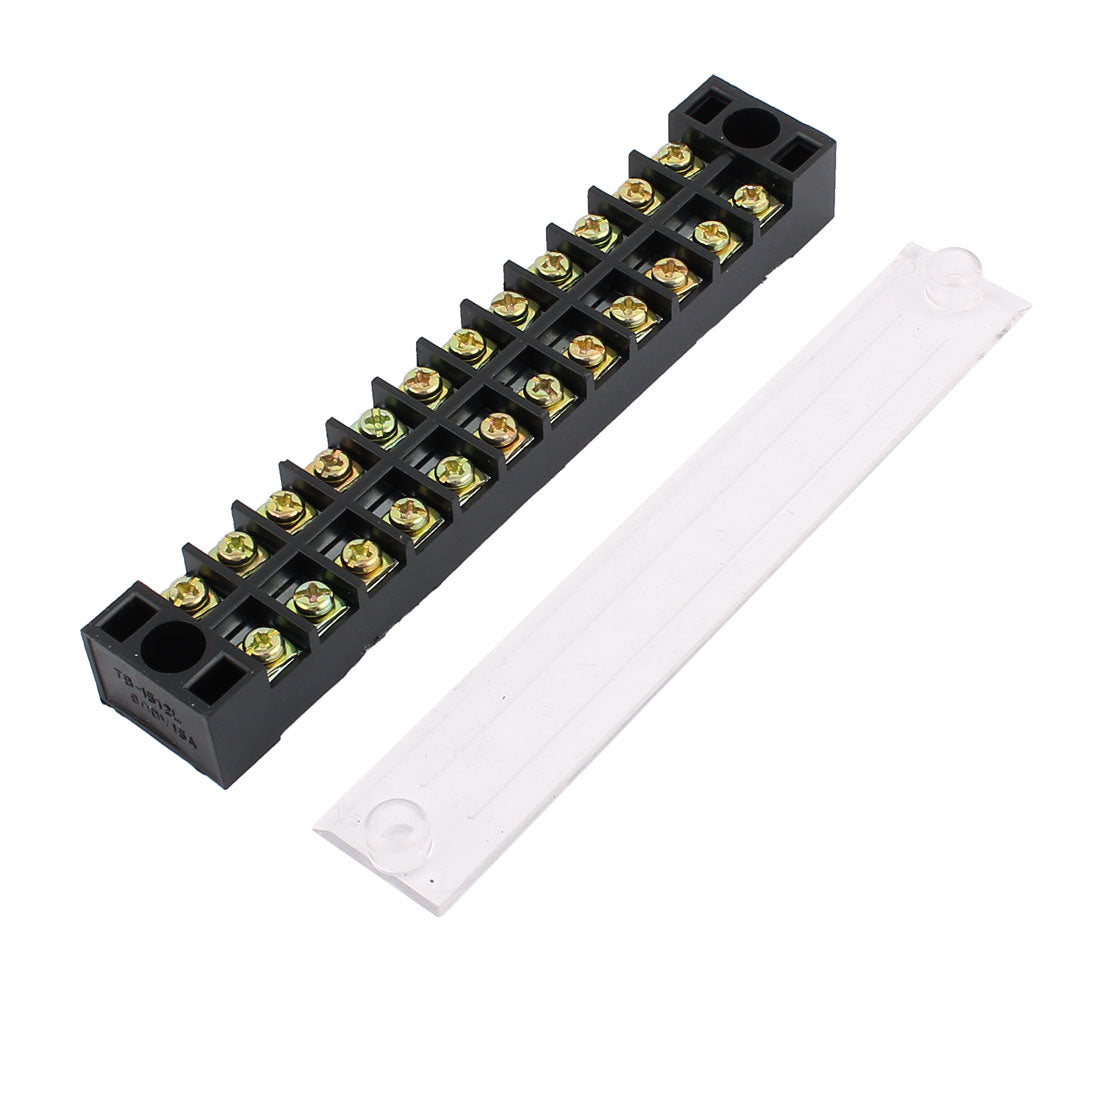 uxcell Uxcell 10 Pcs 600V 15A 12P Screw Electric Barrier Terminal Block Cable Connector Bar